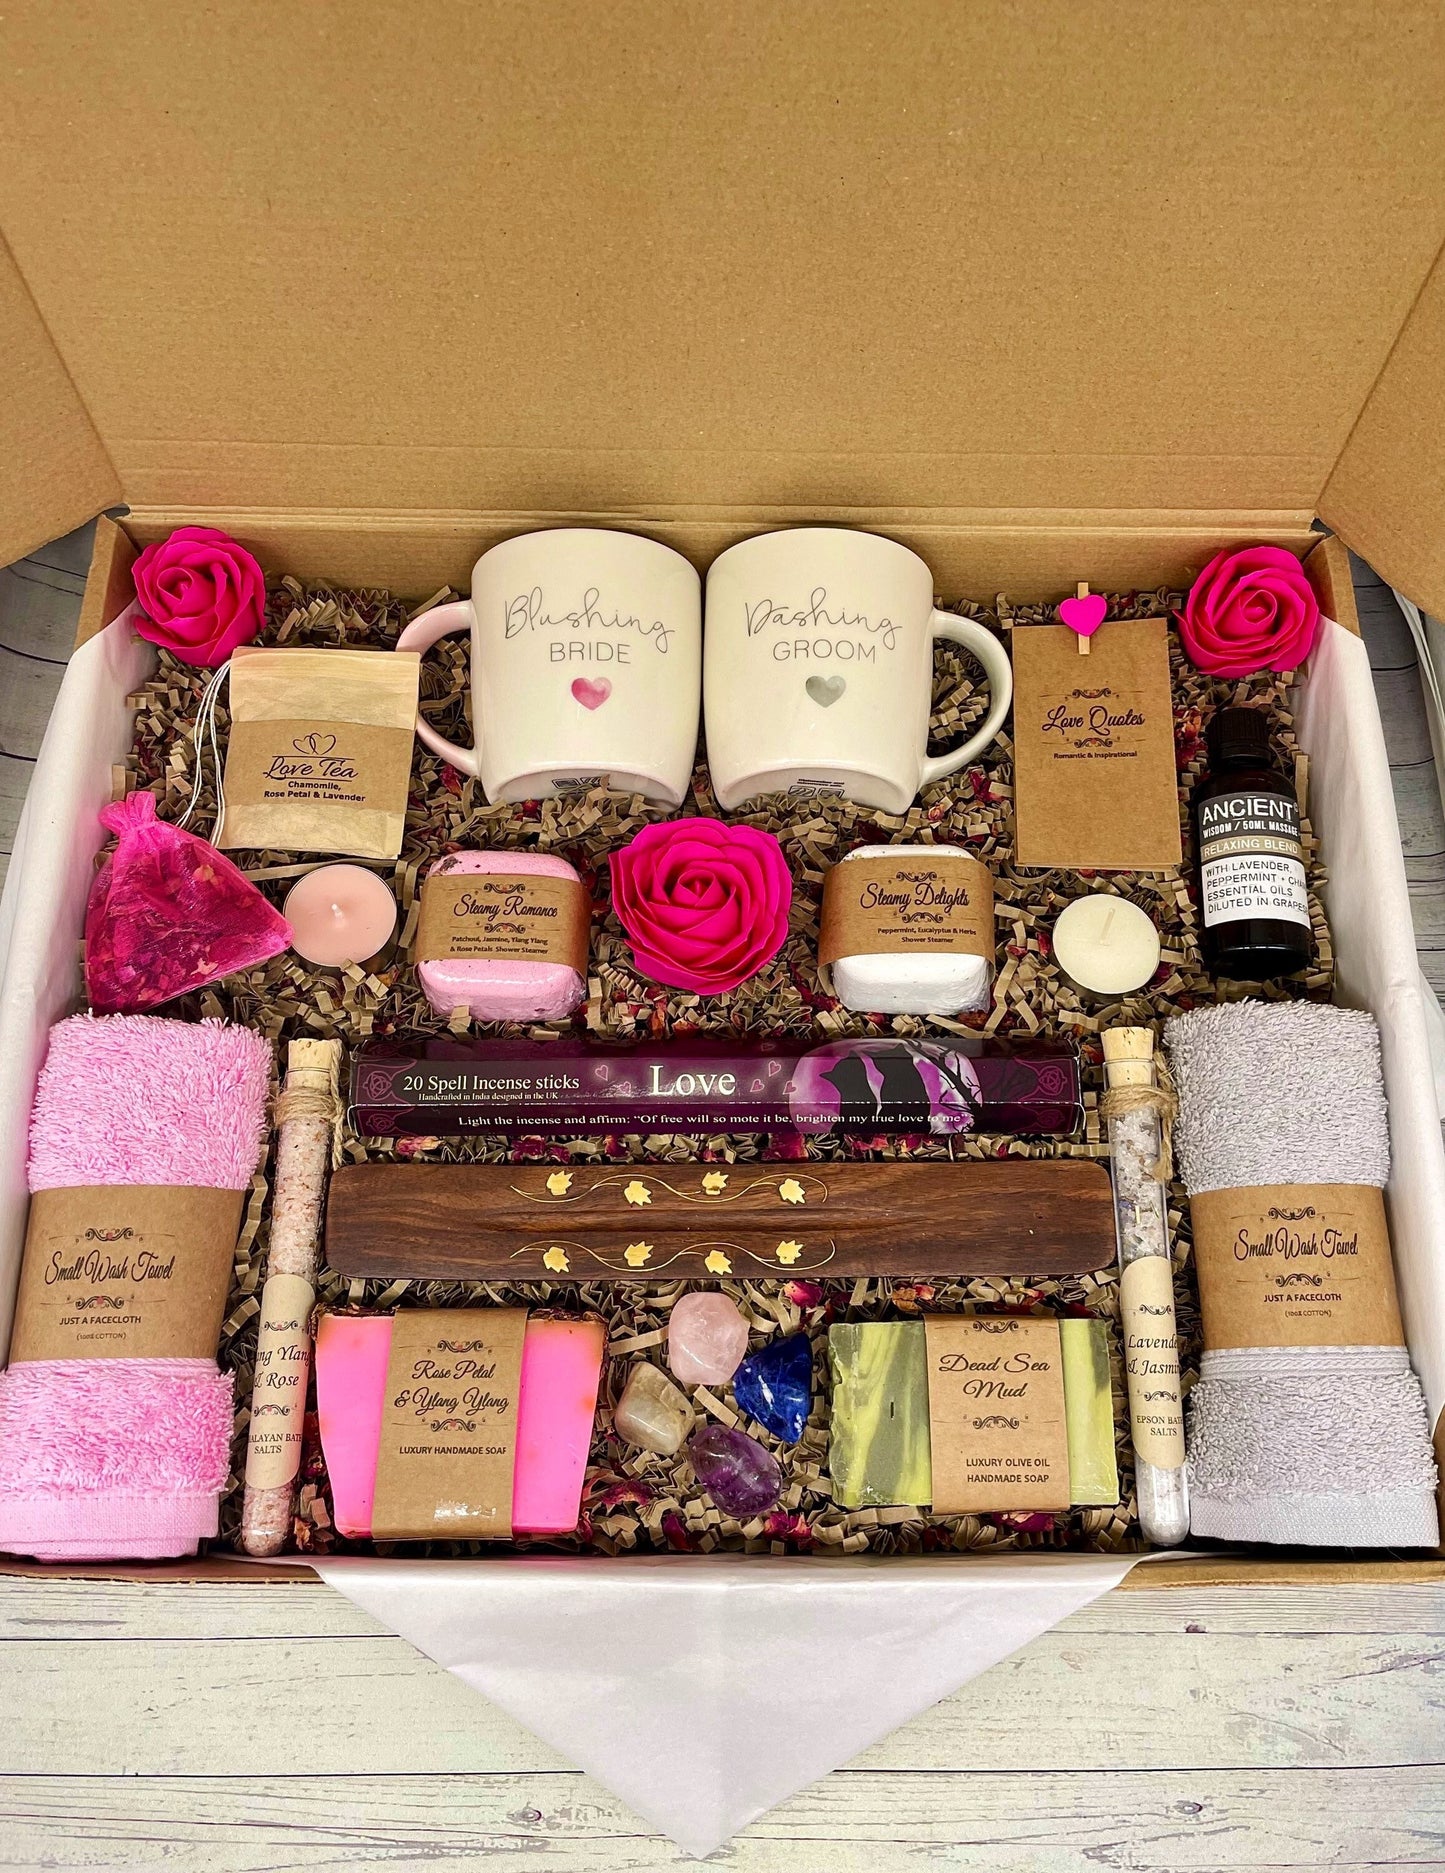 Unique Wedding/Engagement Gift Hamper, Bride & Groom Spa, Relaxation, Pampering, Crystals, Love Tea, Love Quotes, Shower Steamers,